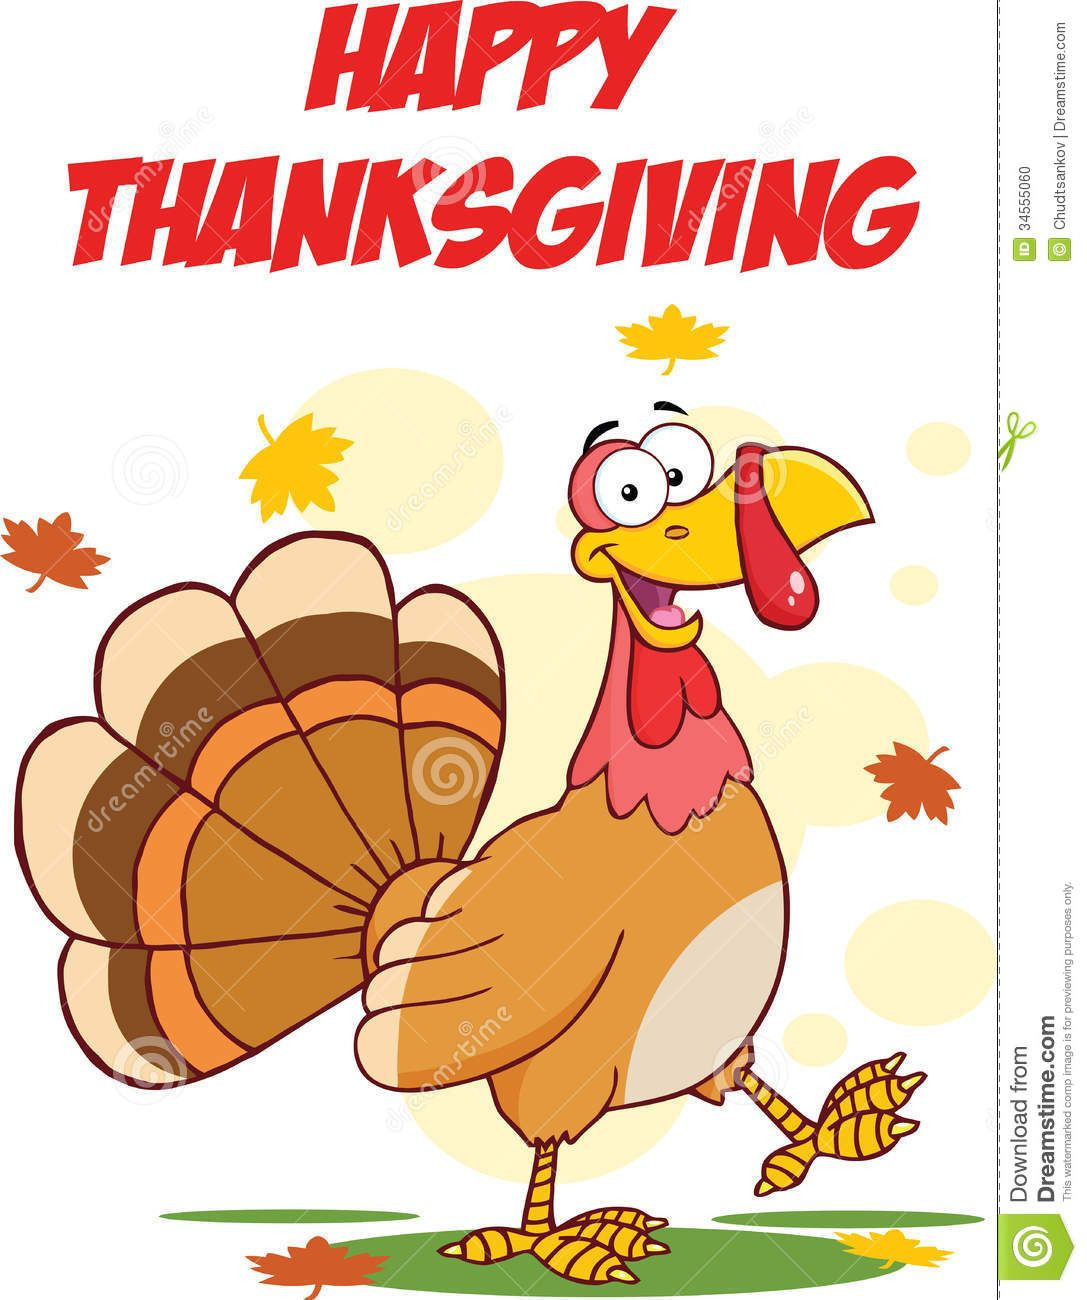 Cartoon Picture Of Turkey For Thanksgiving
 Cartoon Thanksgiving Cartoon Thanksgiving